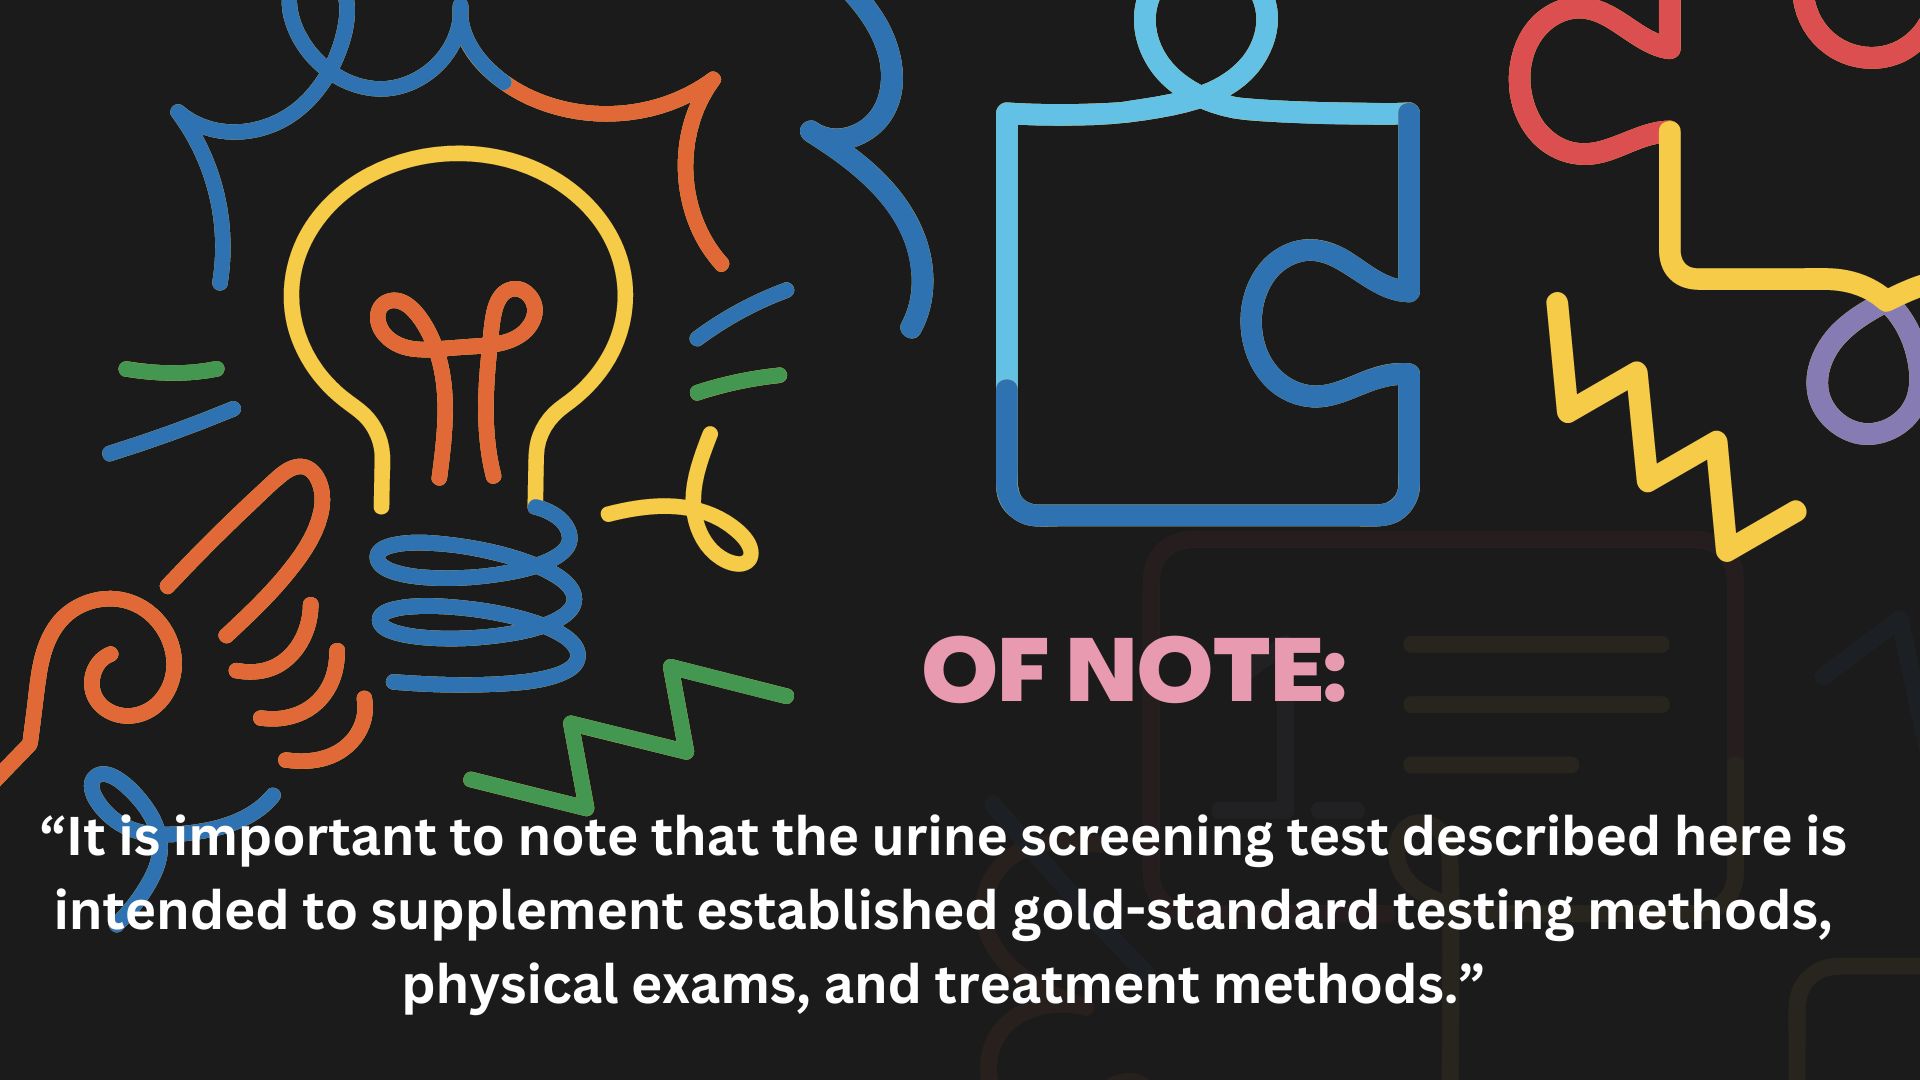 detecting dog cancers via urinalysis study quote 1-- The full text of the quote is written in full above this image in the test of the online article. 